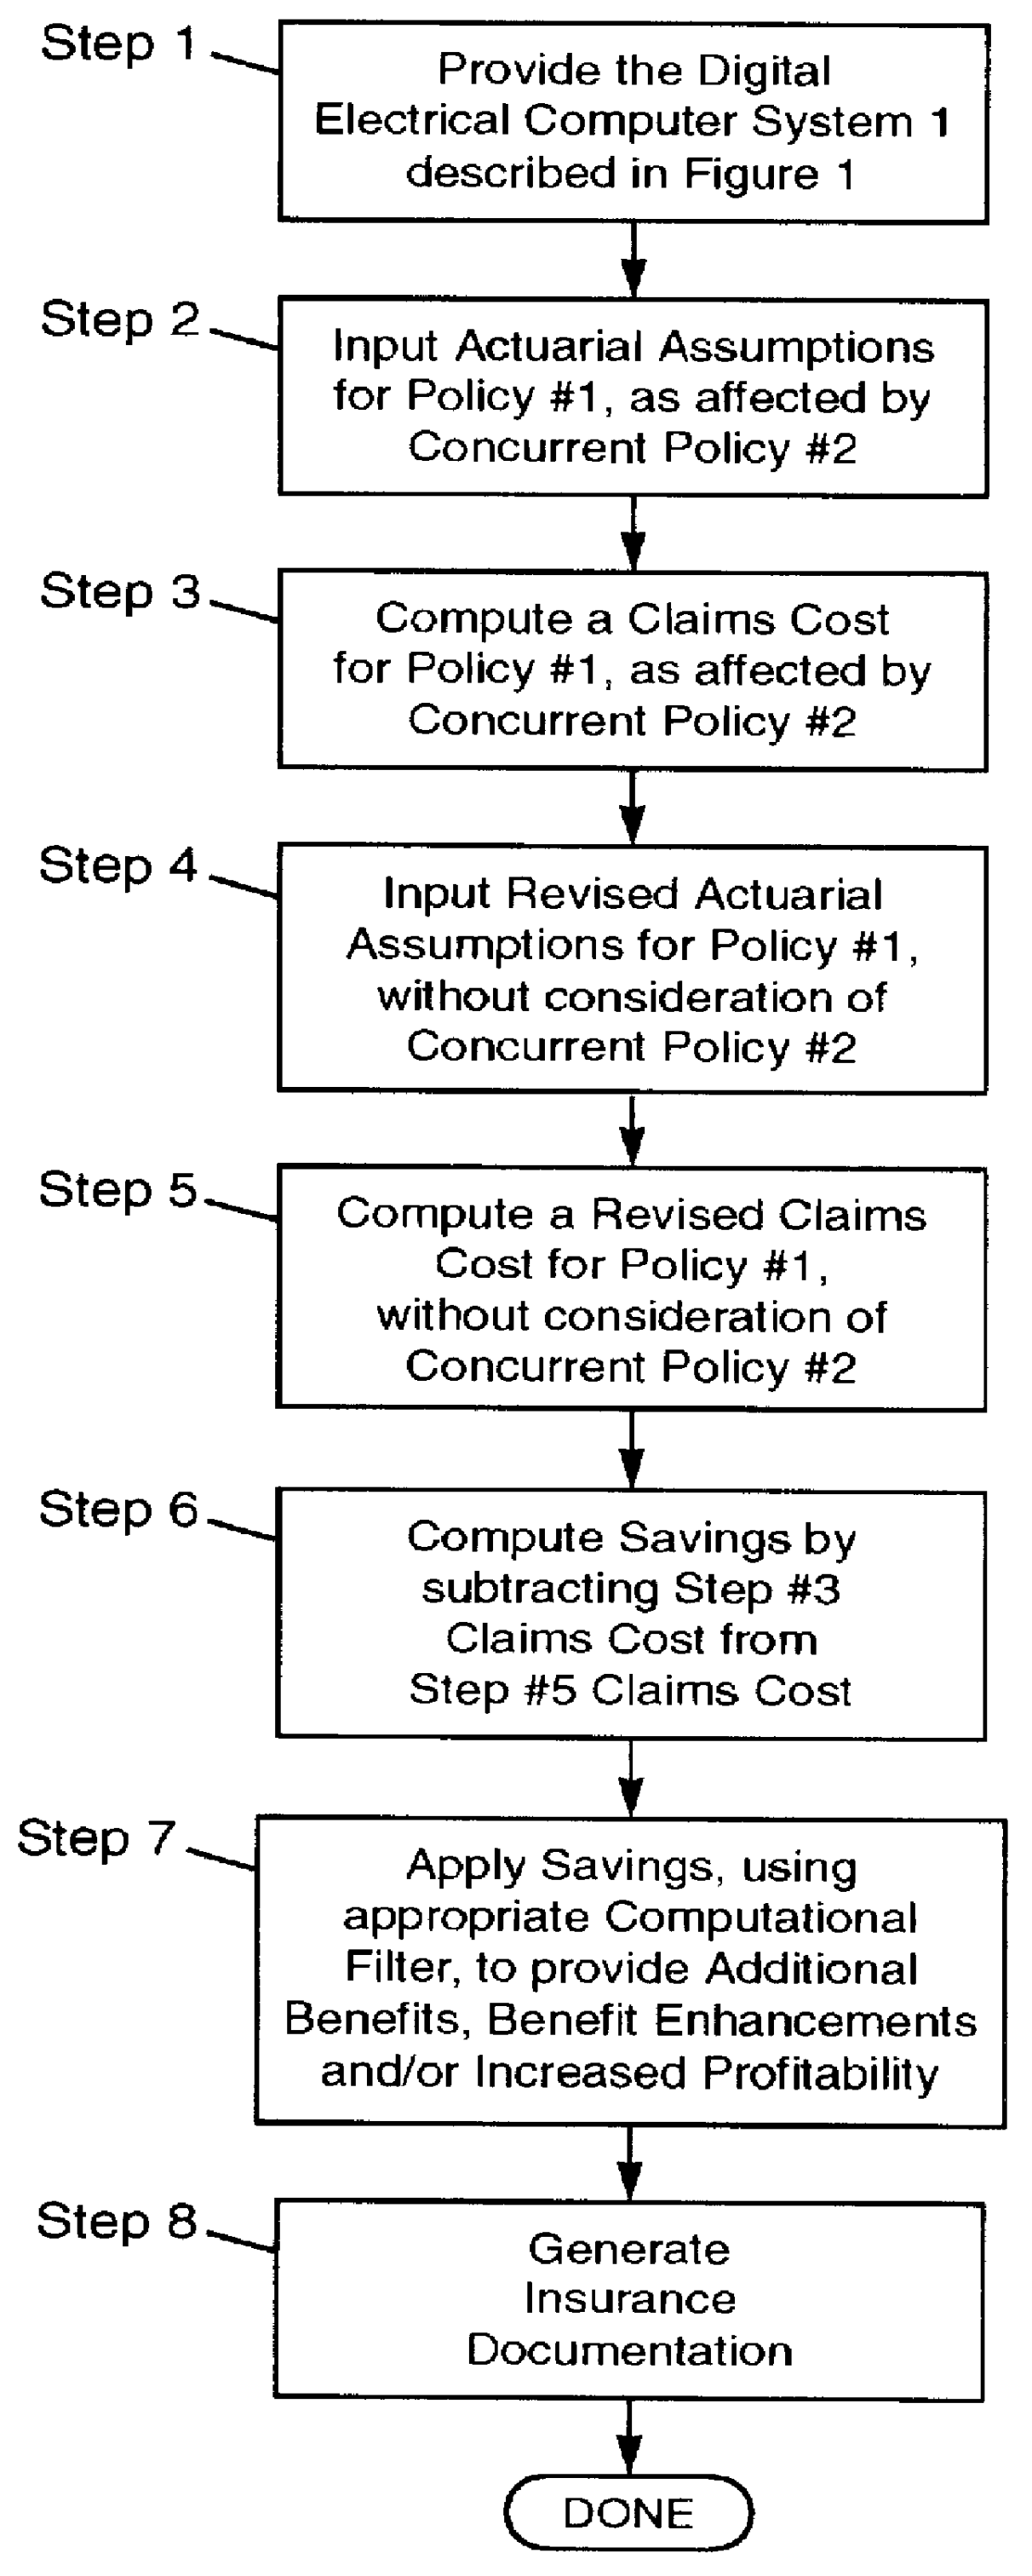 Computer apparatus and method for generating documentation using a computed value for a claims cost affected by at least one concurrent, different insurance policy for the same insured